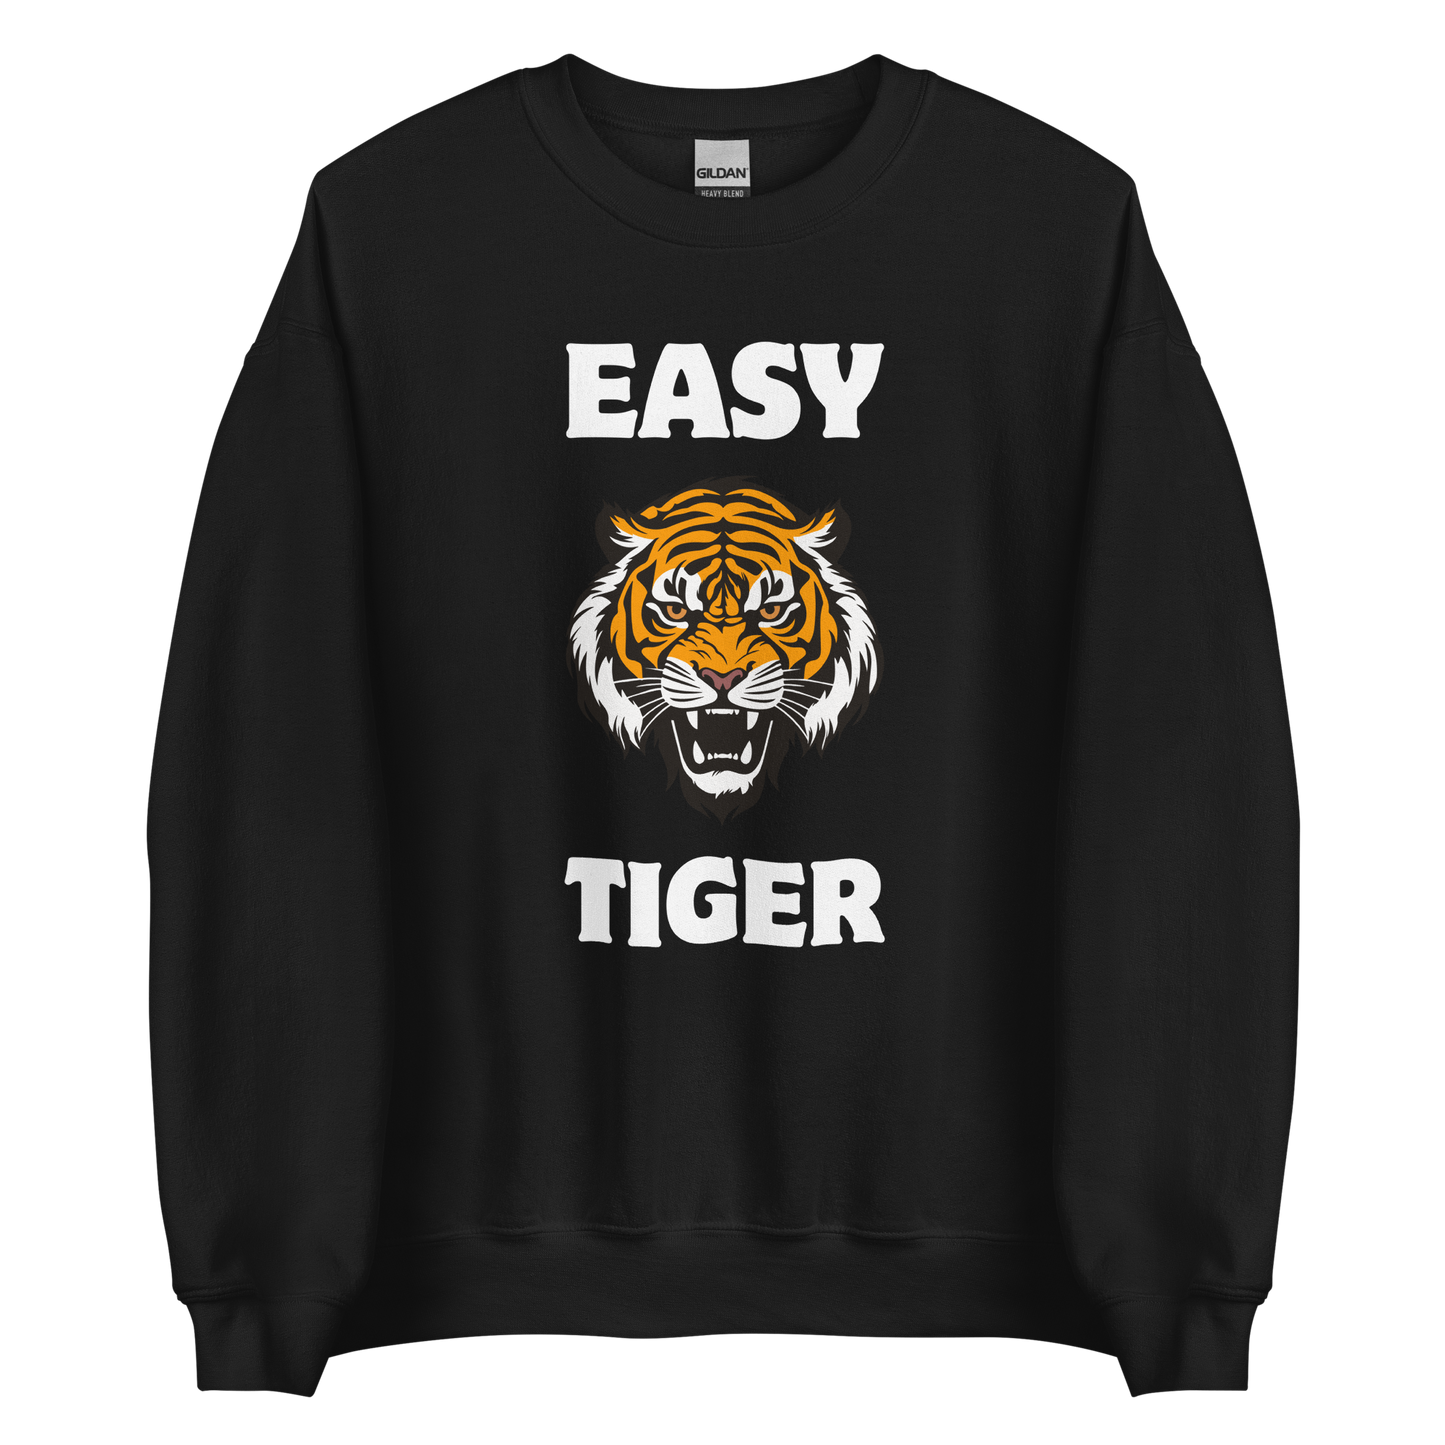 Black Tiger Sweatshirt featuring a Easy Tiger graphic on the chest - Funny Graphic Tiger Sweatshirts - Boozy Fox